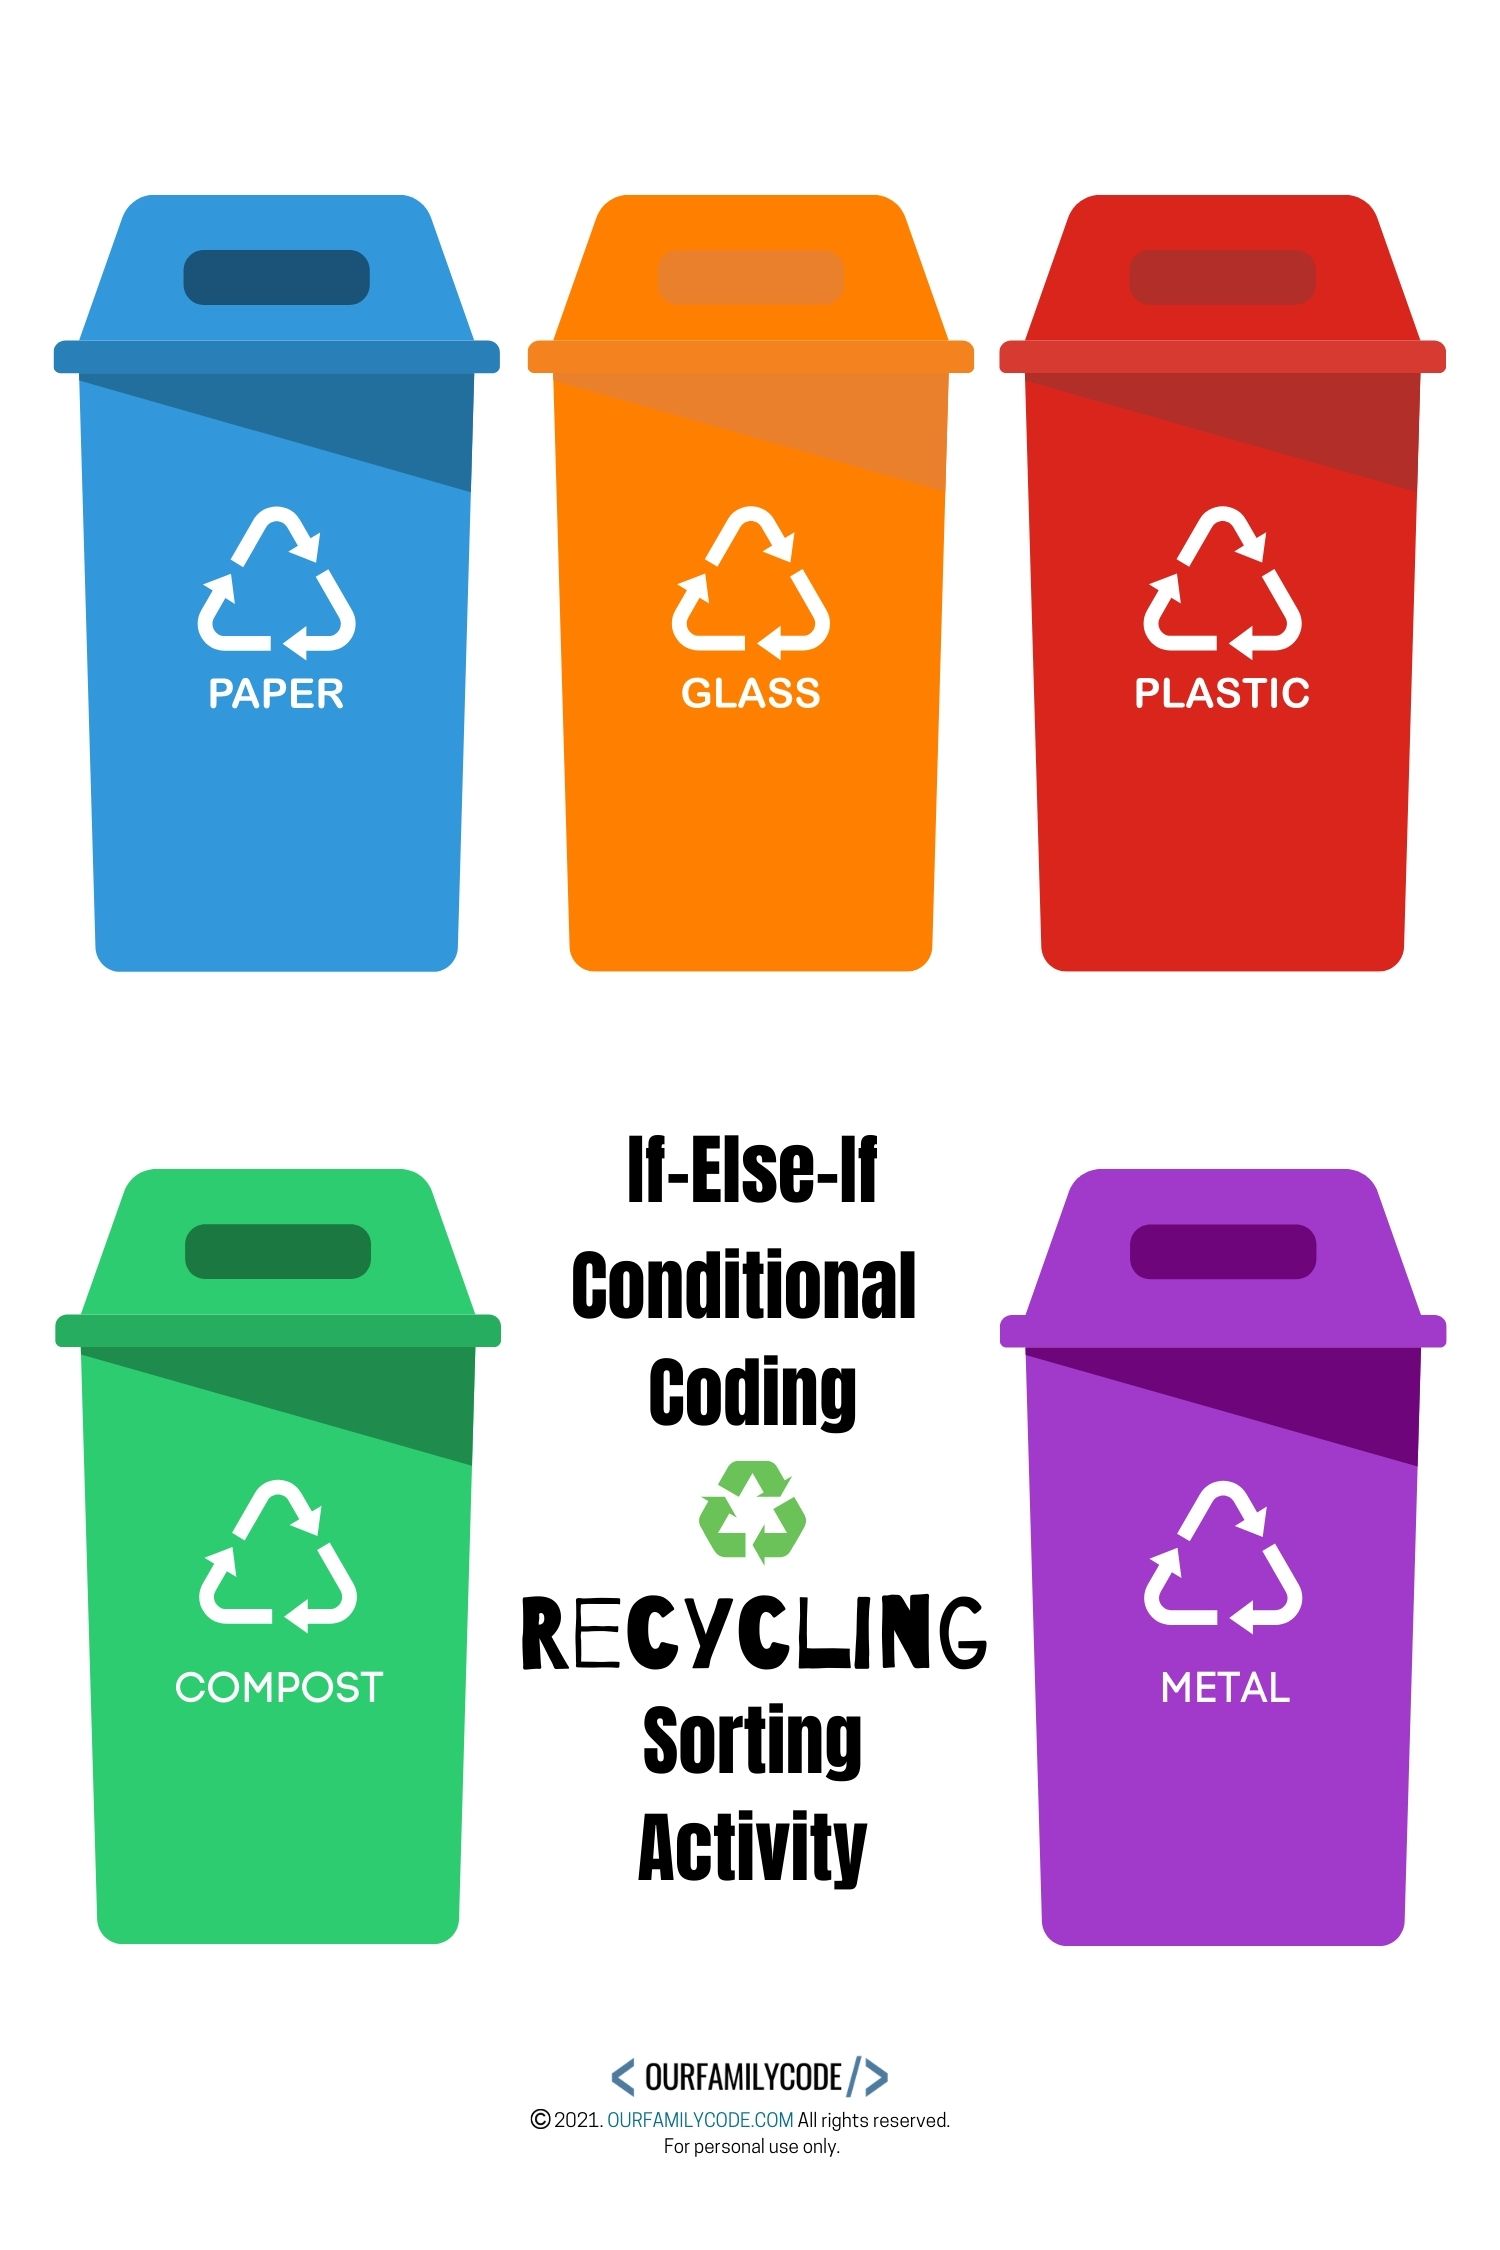 A picture of five recycling bins in various colors.